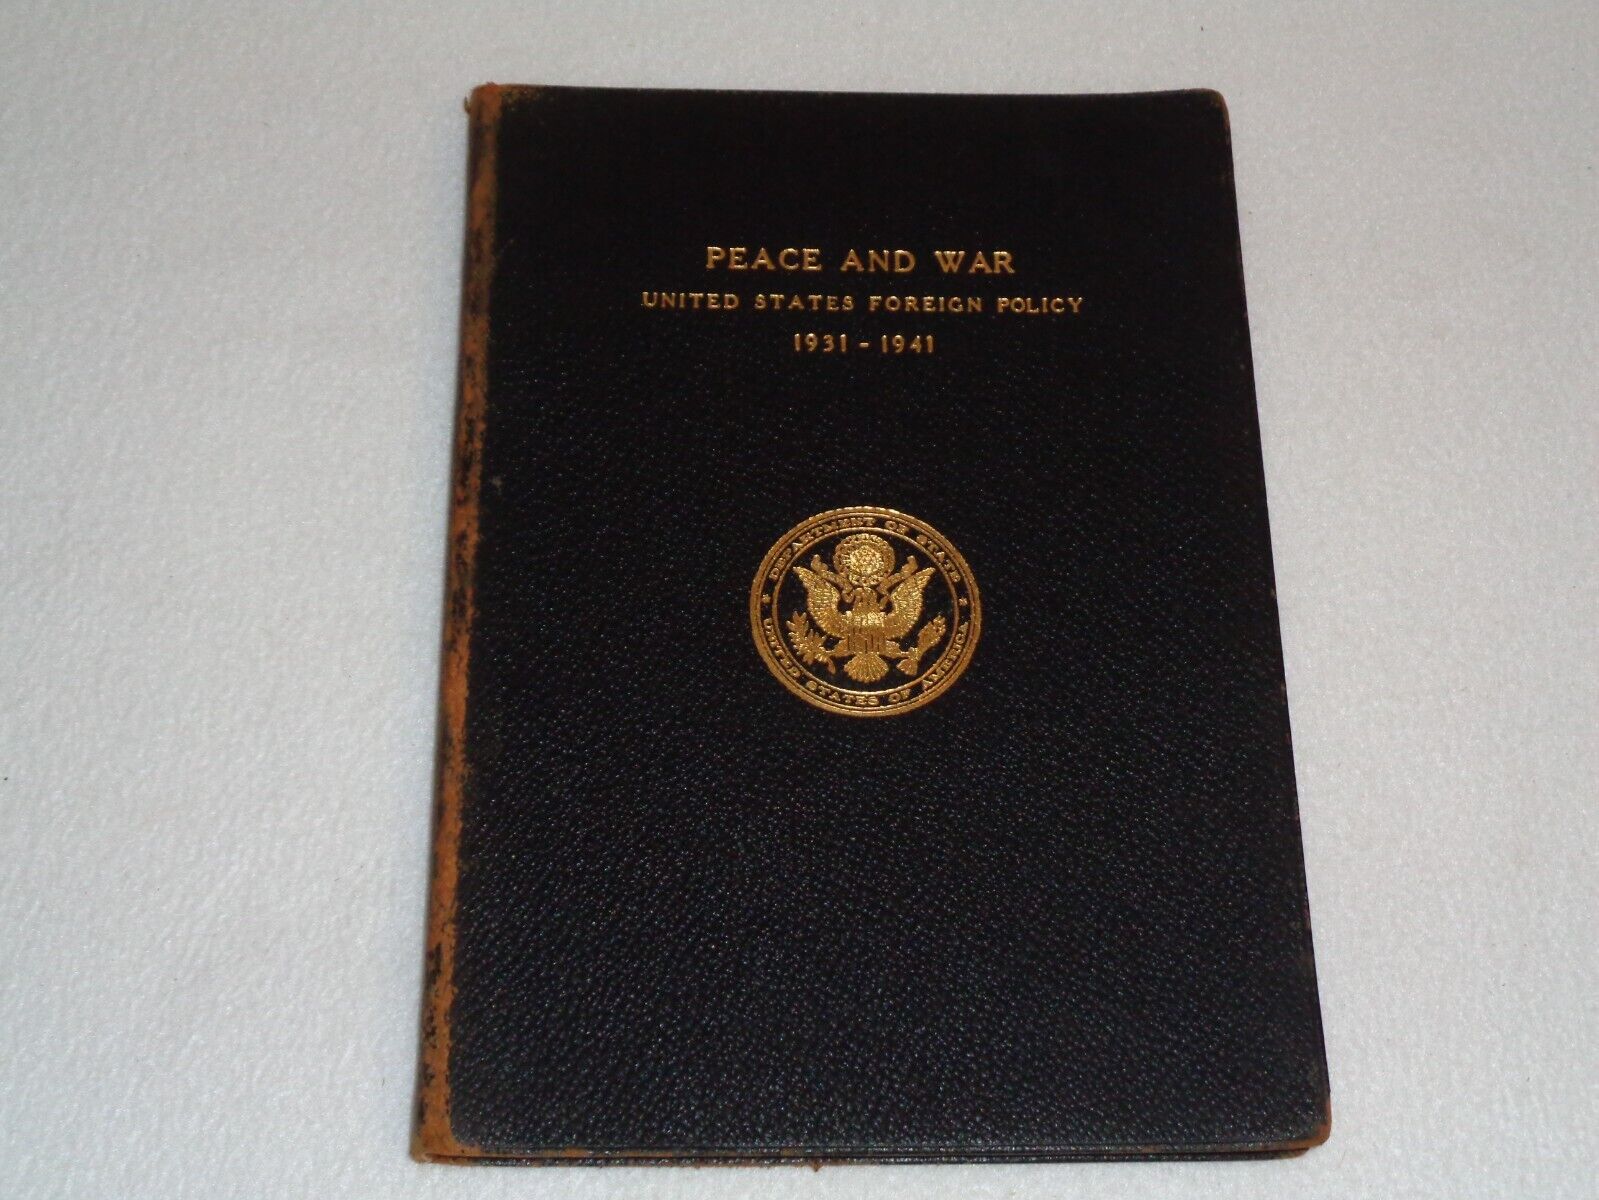 Cordell Hull SIGNED Peace and War U.S. Foreign Policy 1931-1941 Rare Book